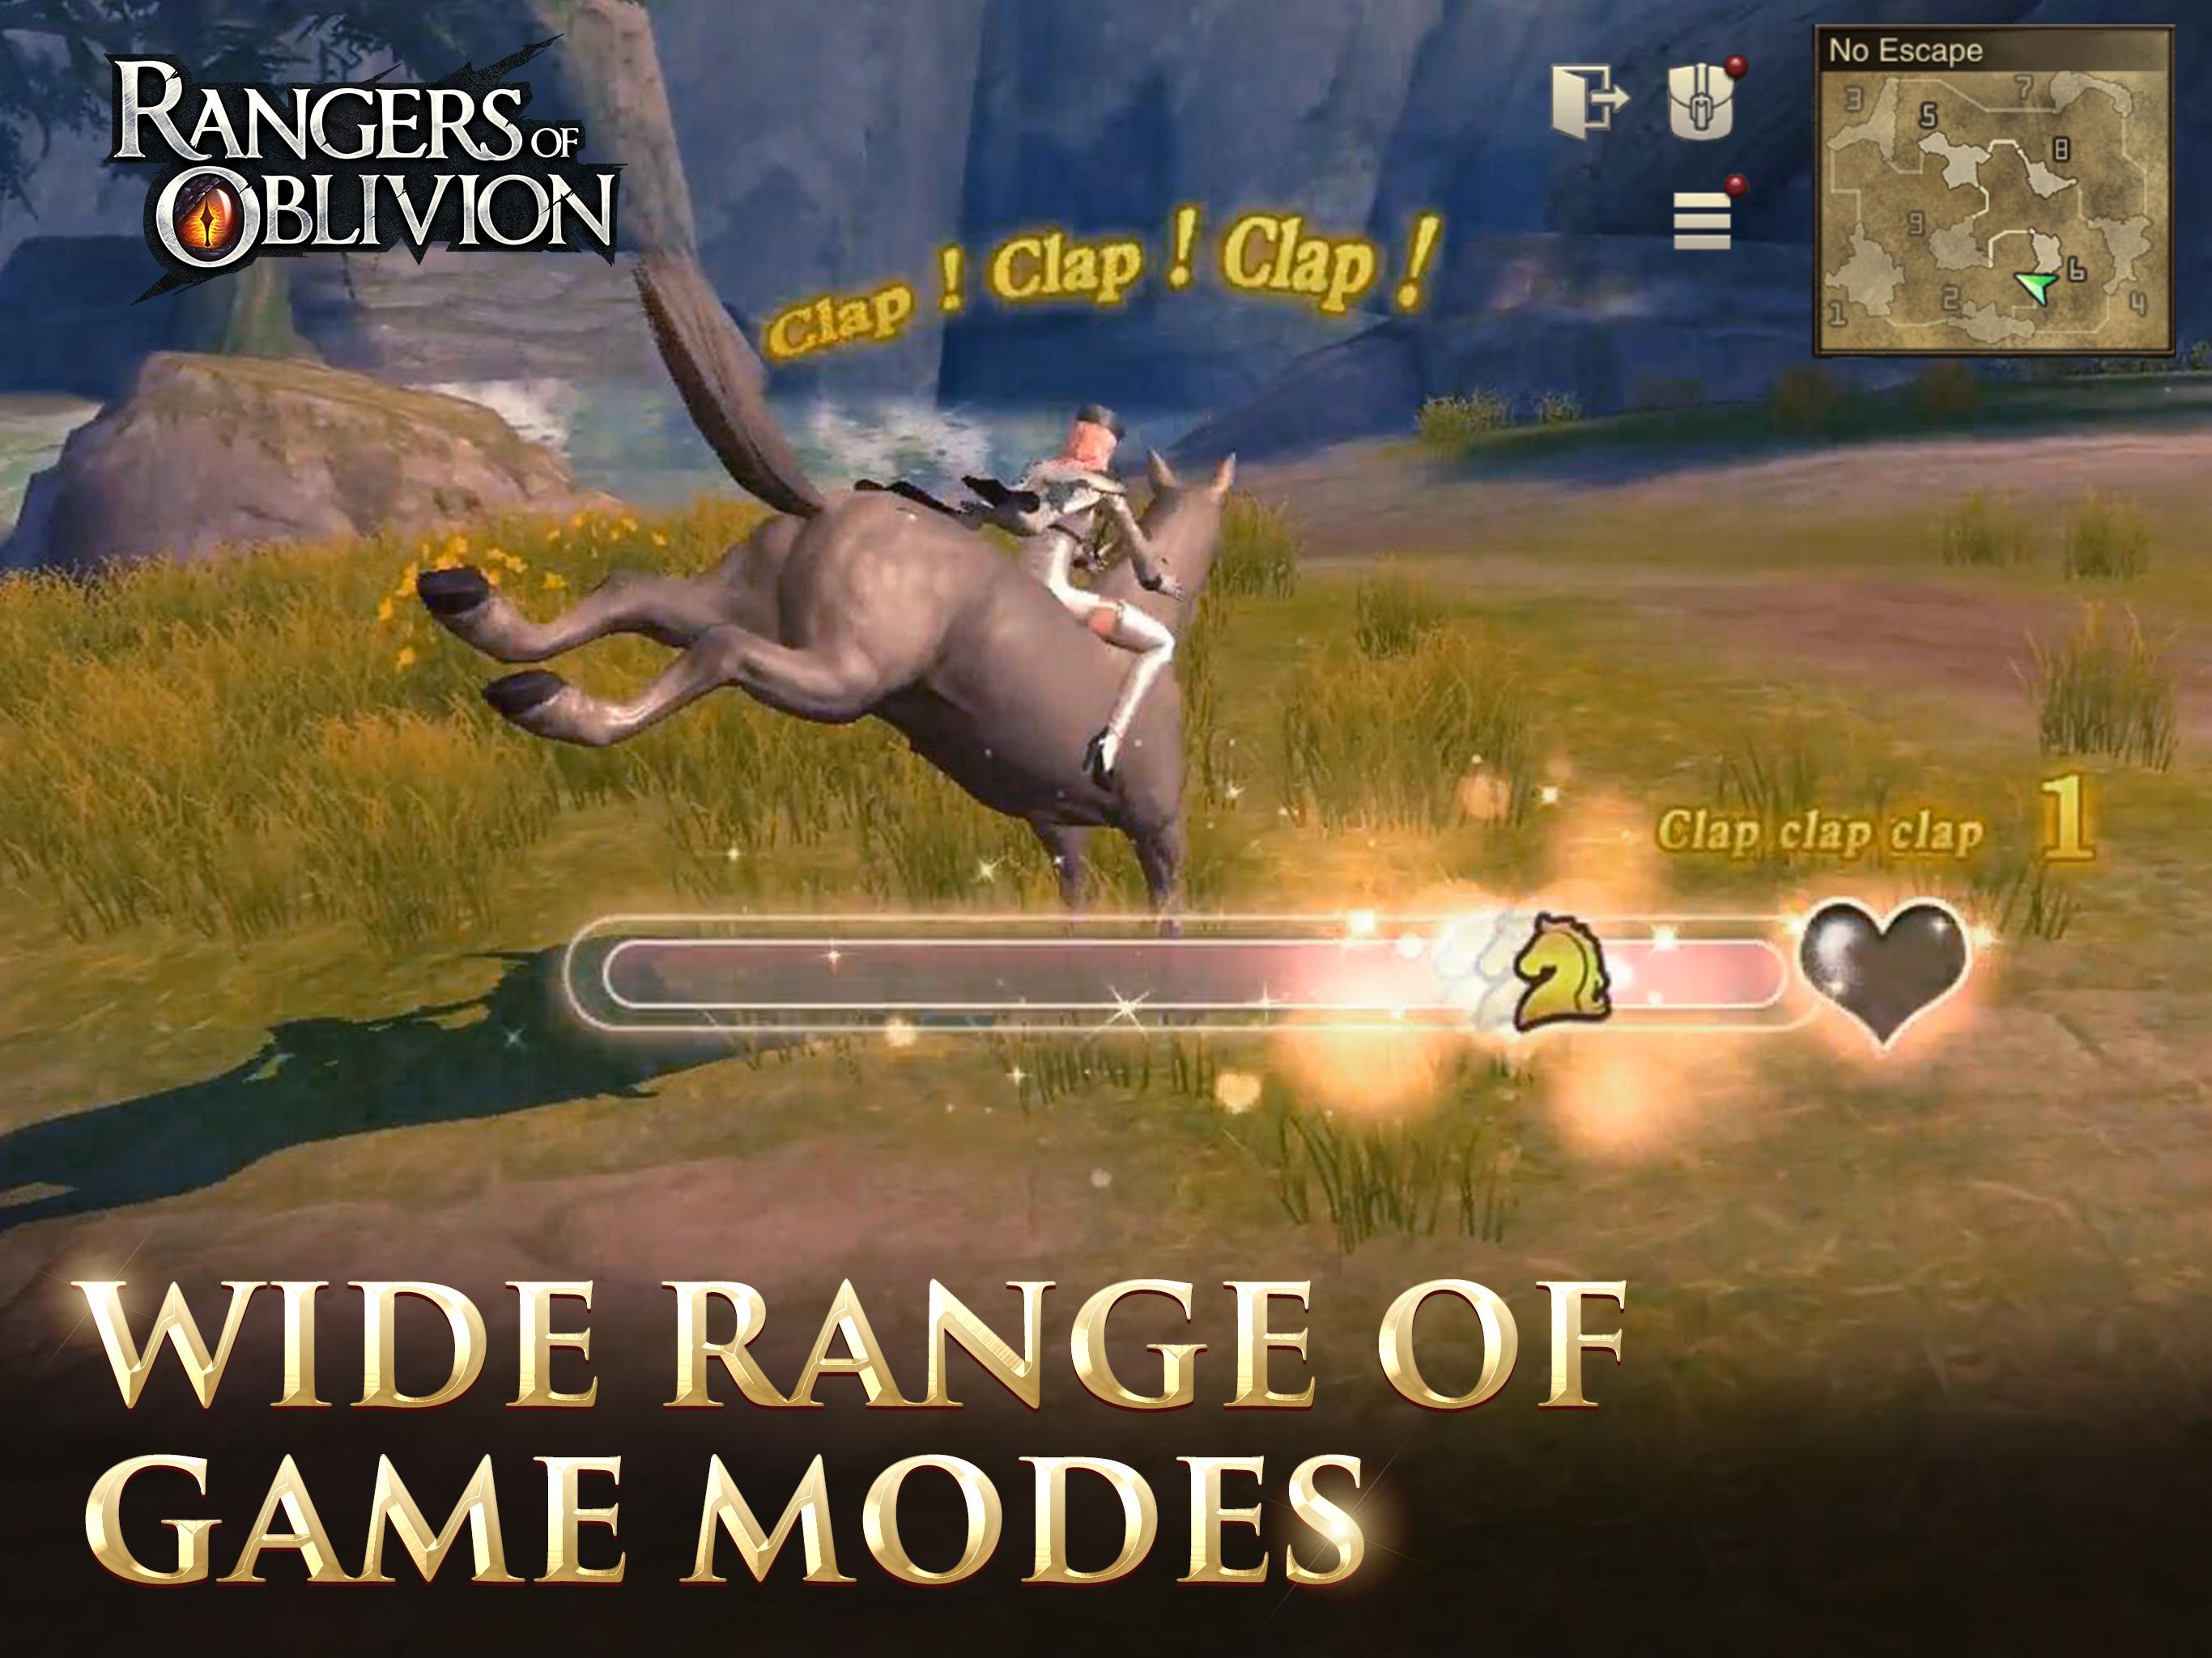 Download Rangers of Oblivion on PC with BlueStacks | 64 ...